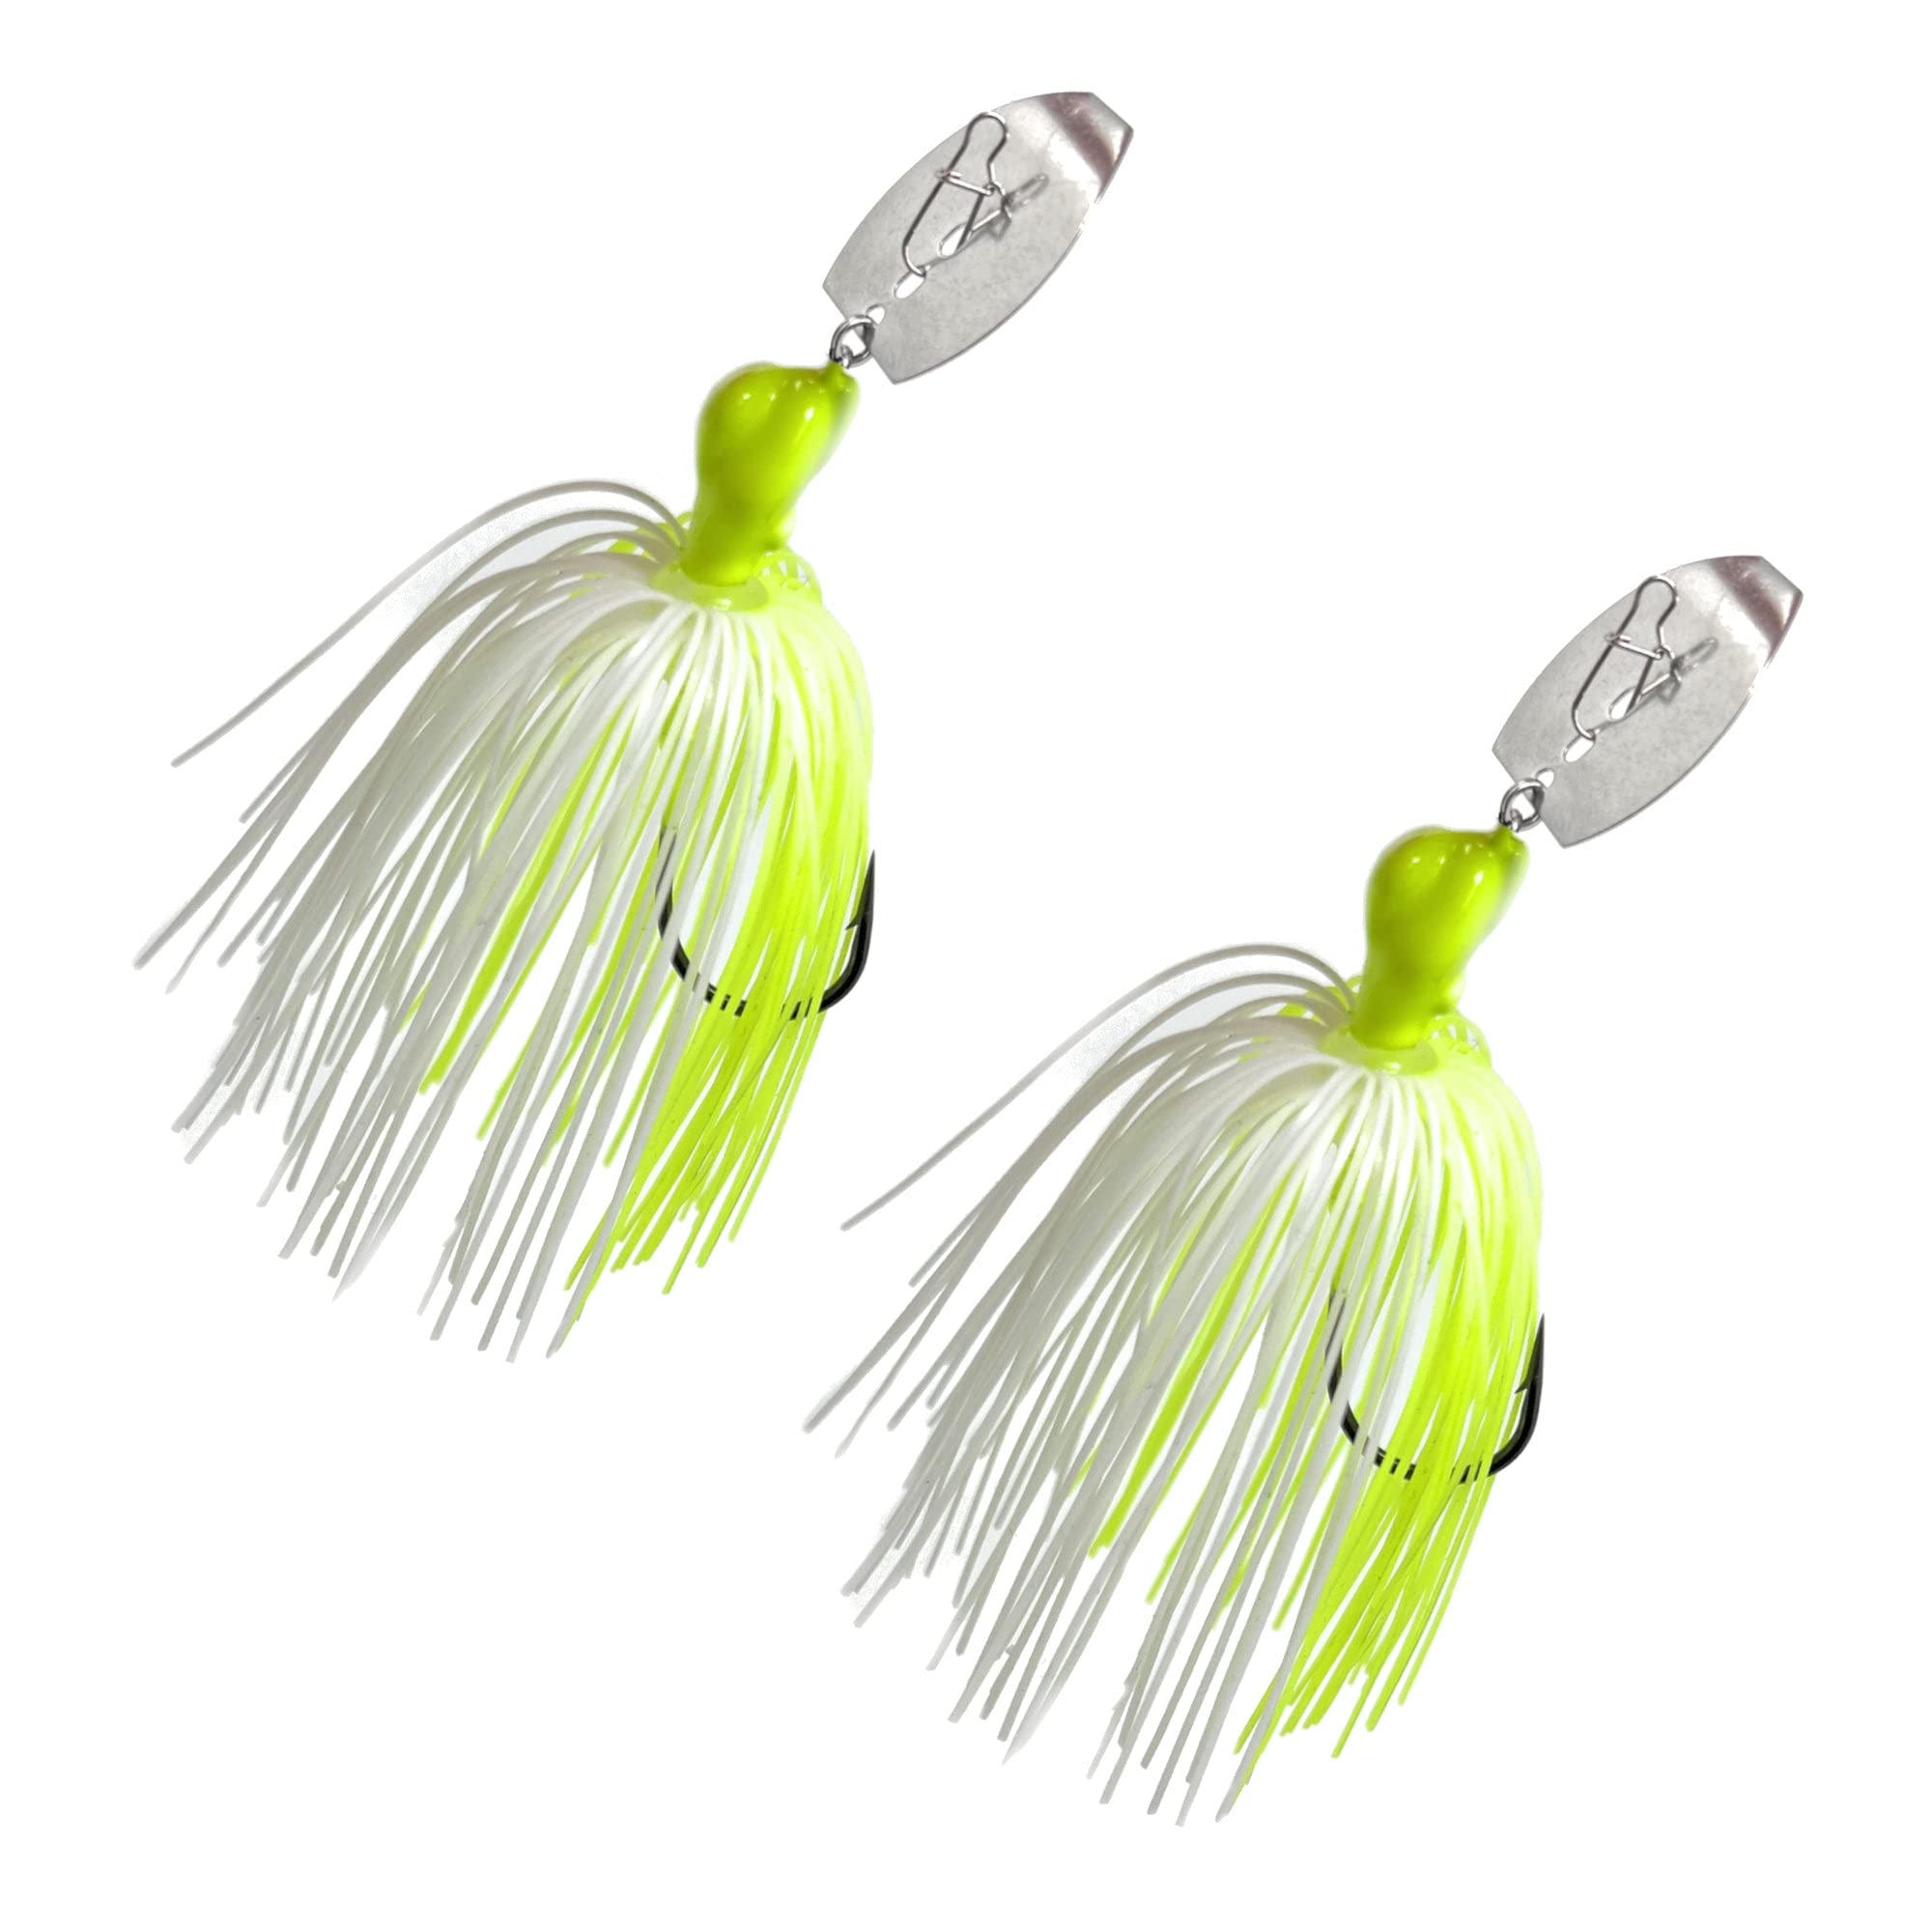 Reaction Tackle Tungsten Breaker Blade Jig Heads for Fishing - 2 Pack of  Fishing Jigs for Large